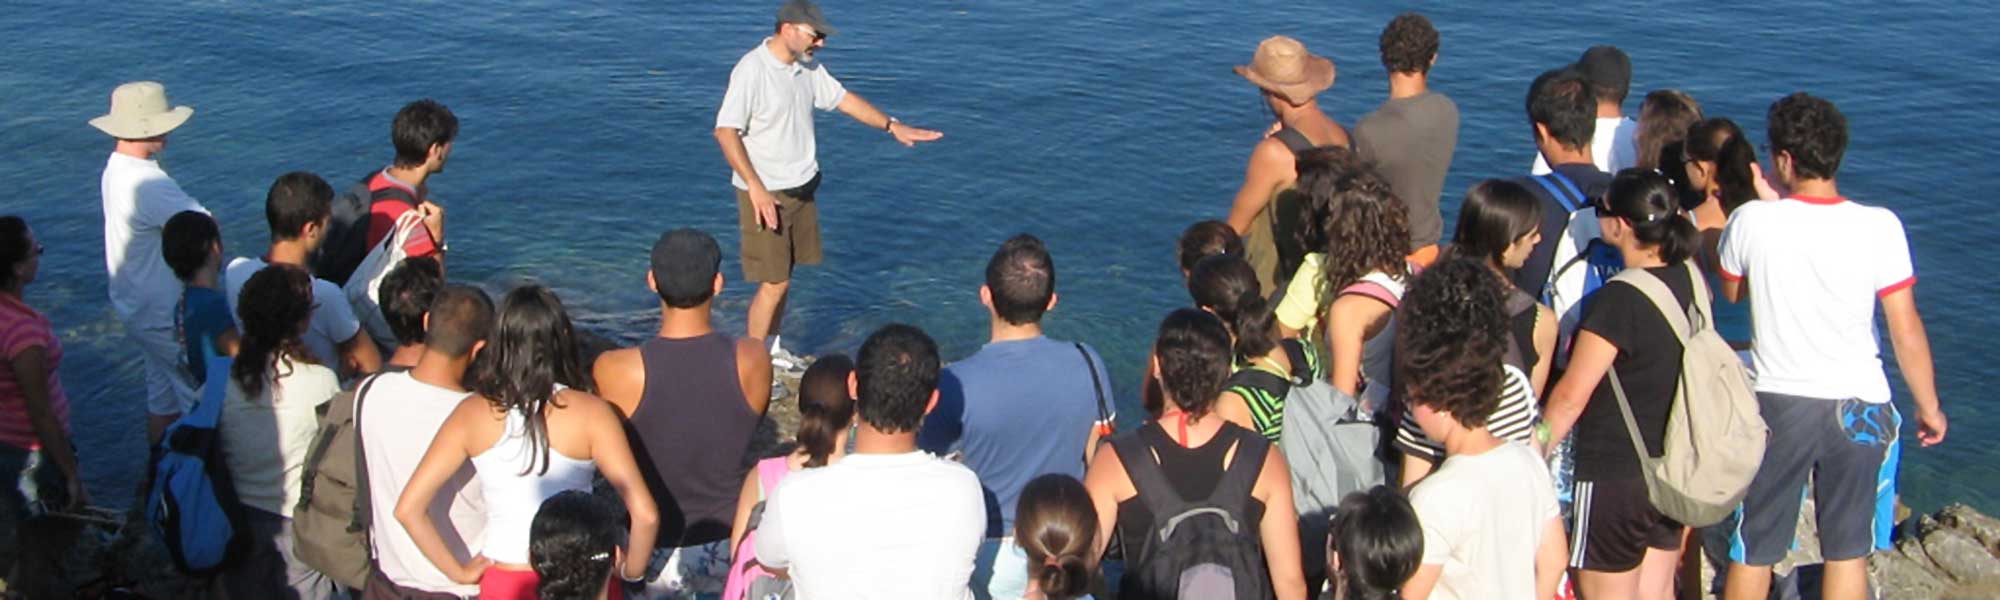 Lecturing by the sea